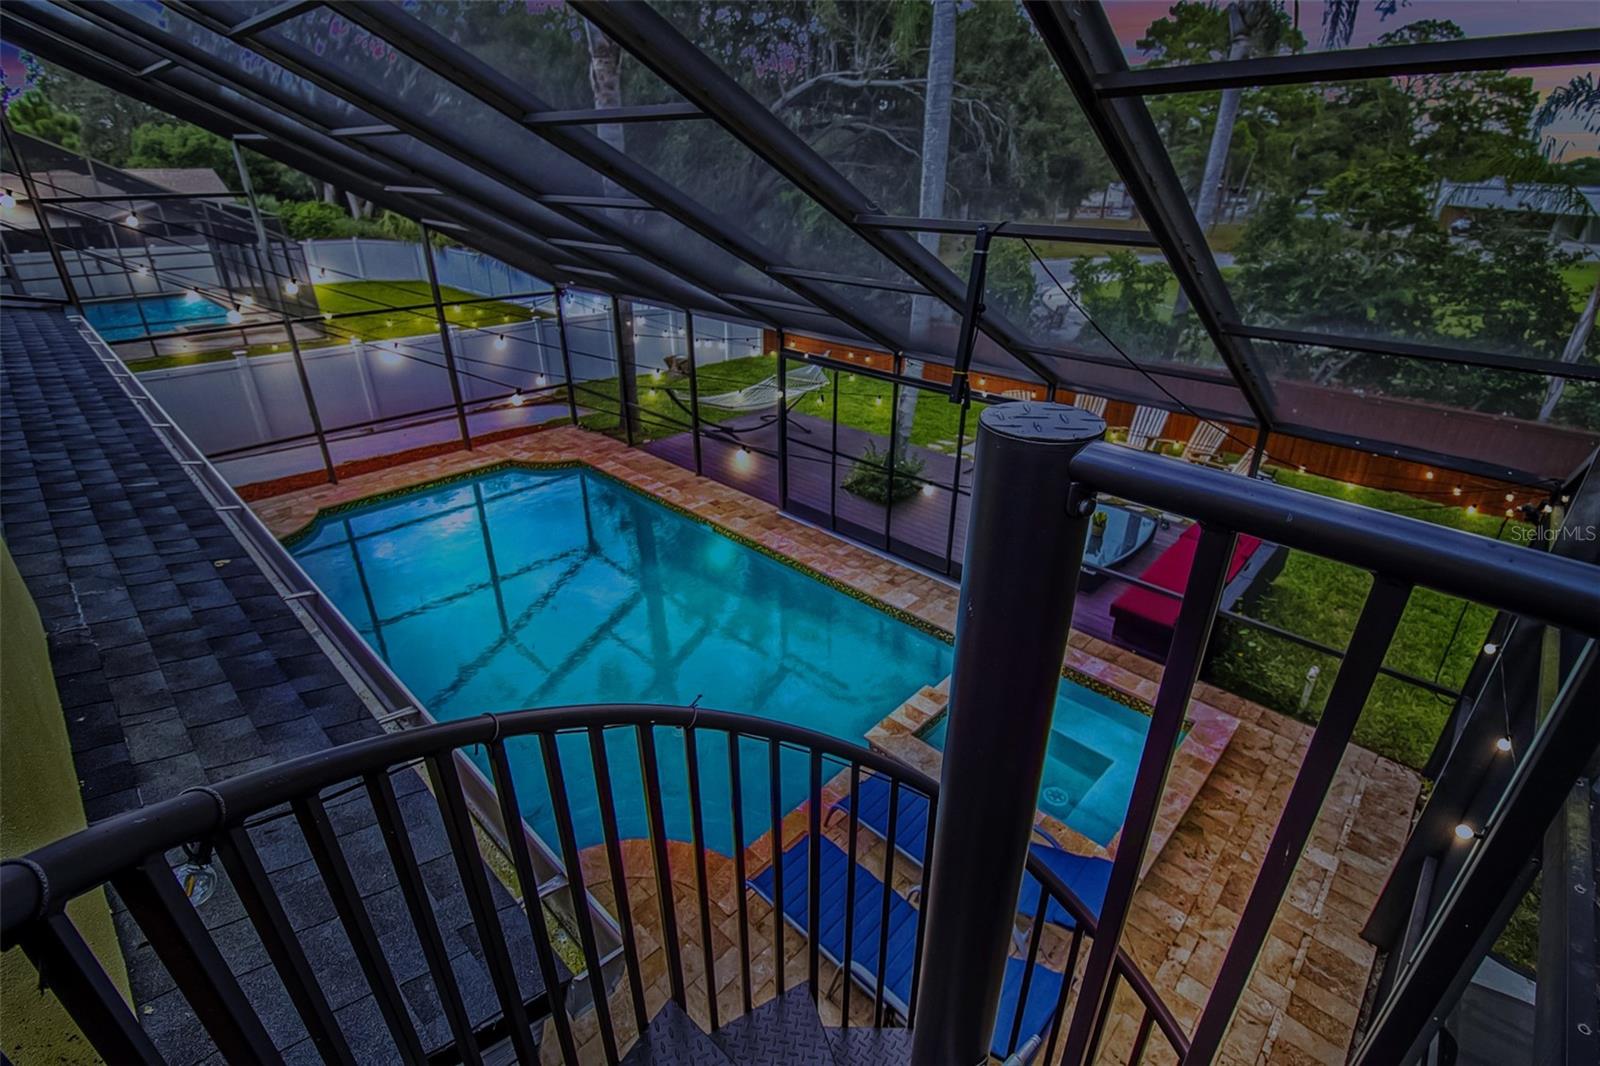 Spiral staircase leading down from private balcony to pool area